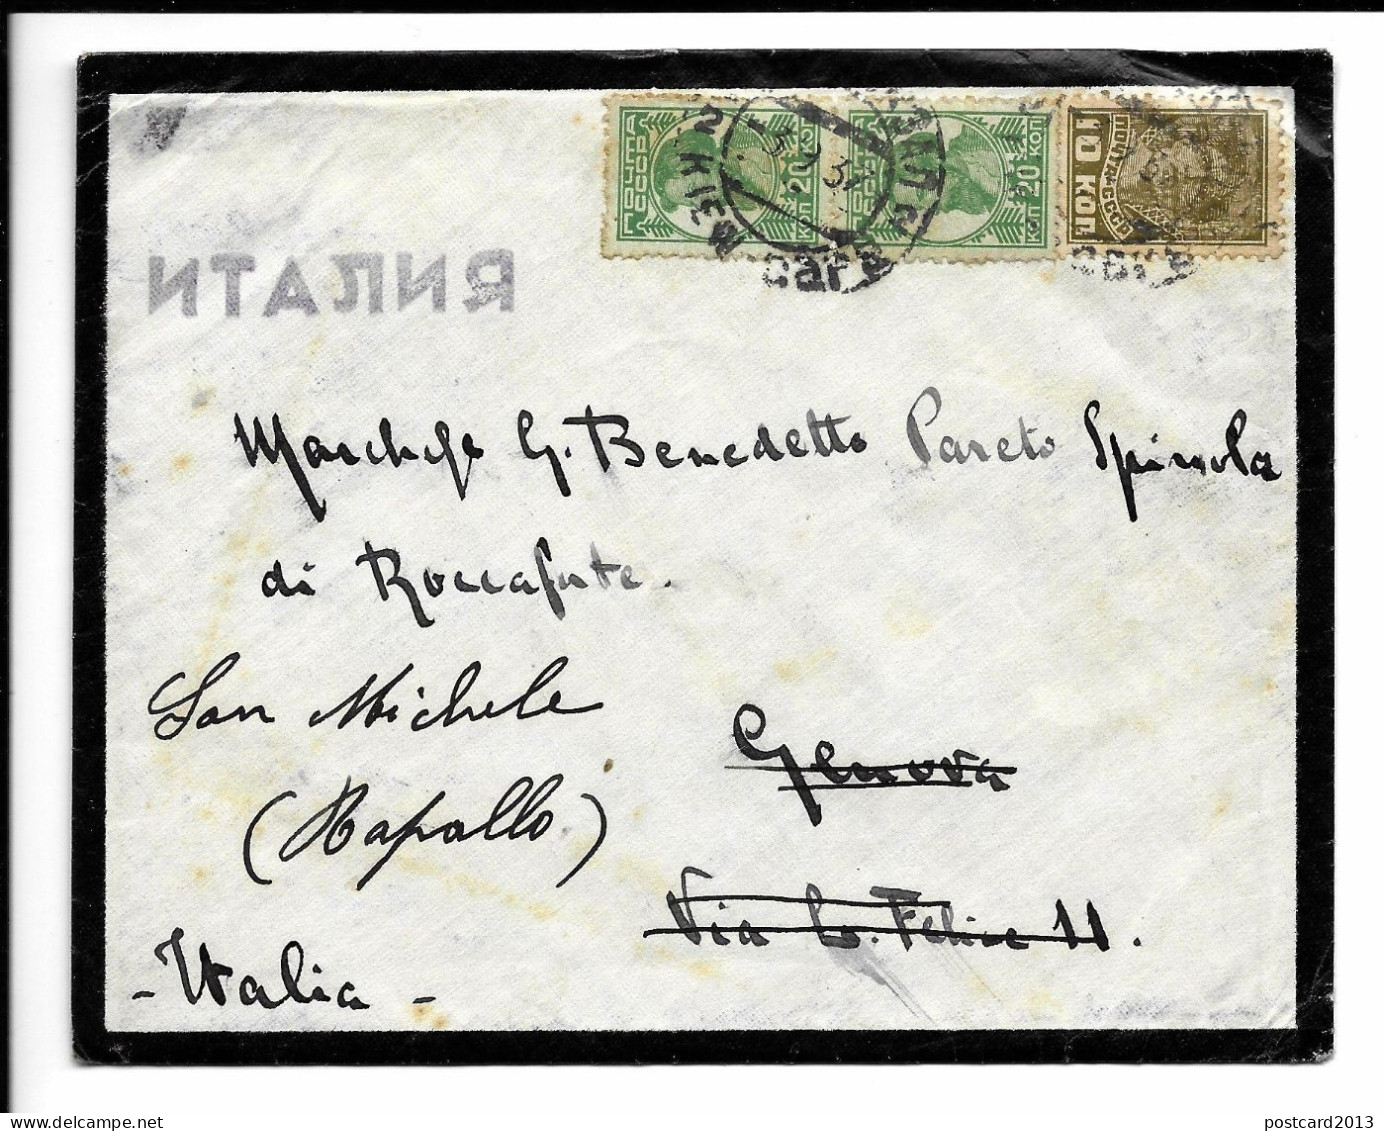 RUSSIA, LETTER FROM THE ITALIAN CONSULATE OF KIEV TO SAN MICHELE (RAPALLO - GENOA - ITALY), 1937. - Lettres & Documents